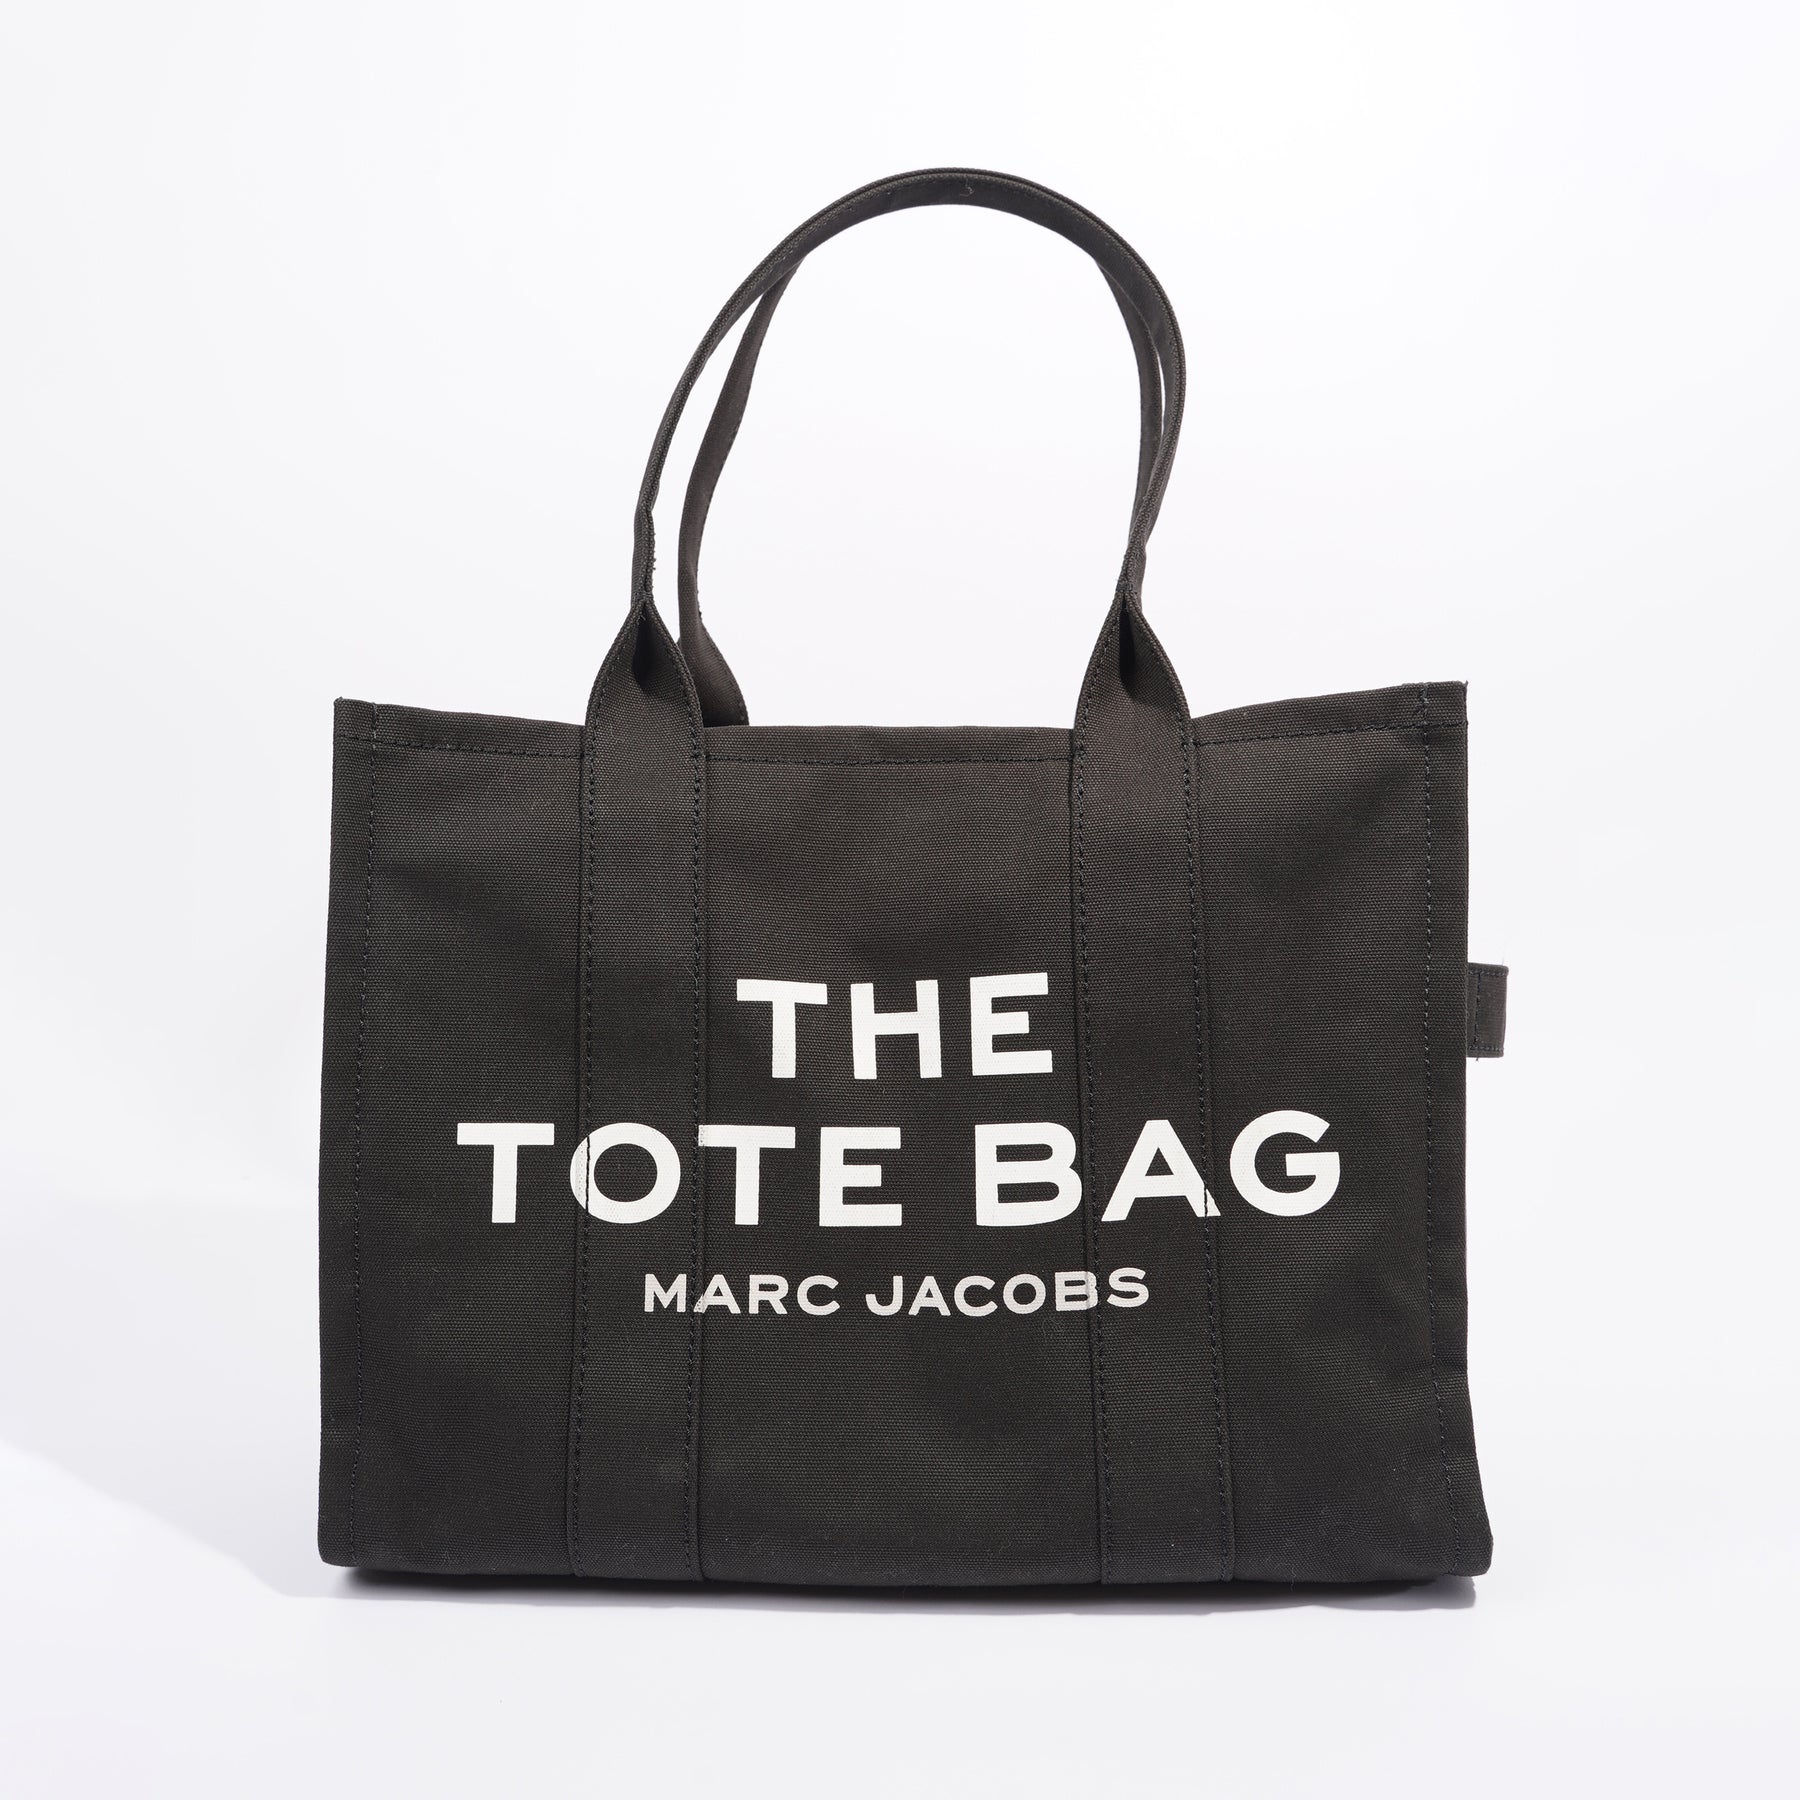 fake marc jacobs tote bag vs real - INDIAN LEATHER MANUFACTURER